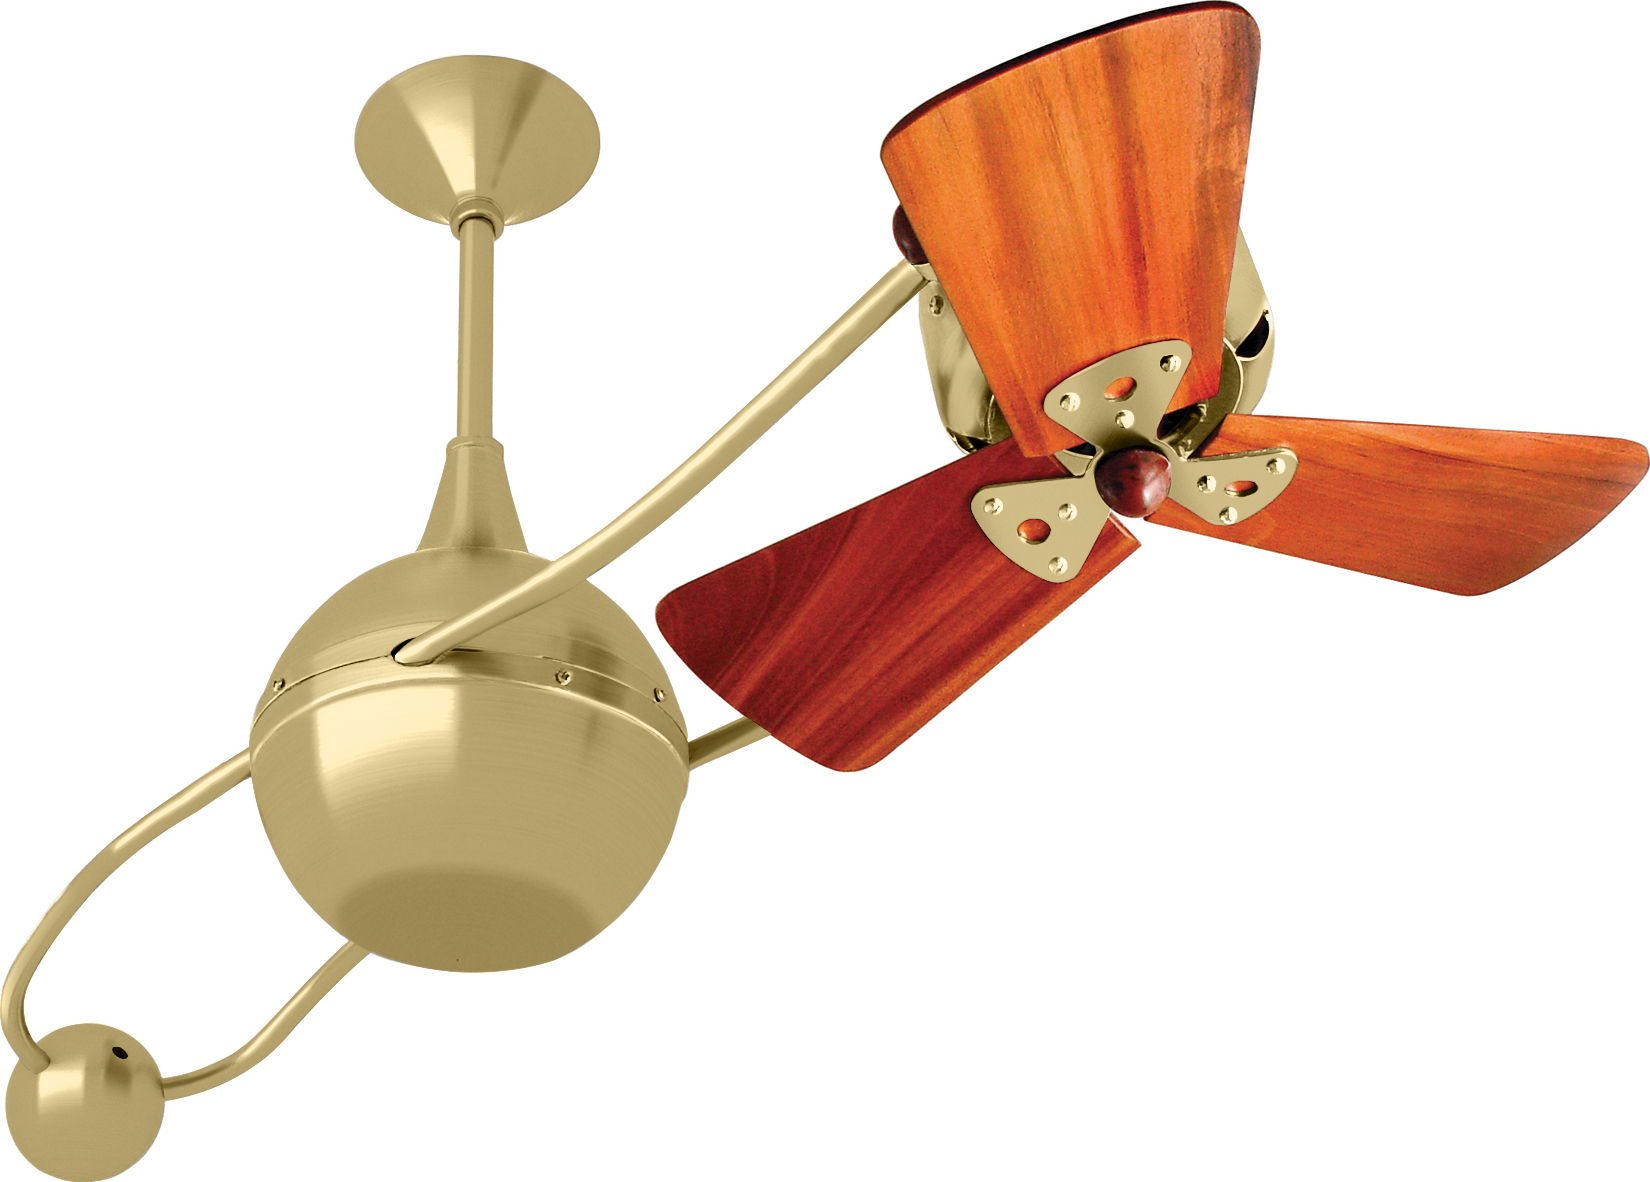 Brisa 2000 ceiling fan in Brushed Brass finish with Mahogany Wood Blades made by Matthews Fan Company.